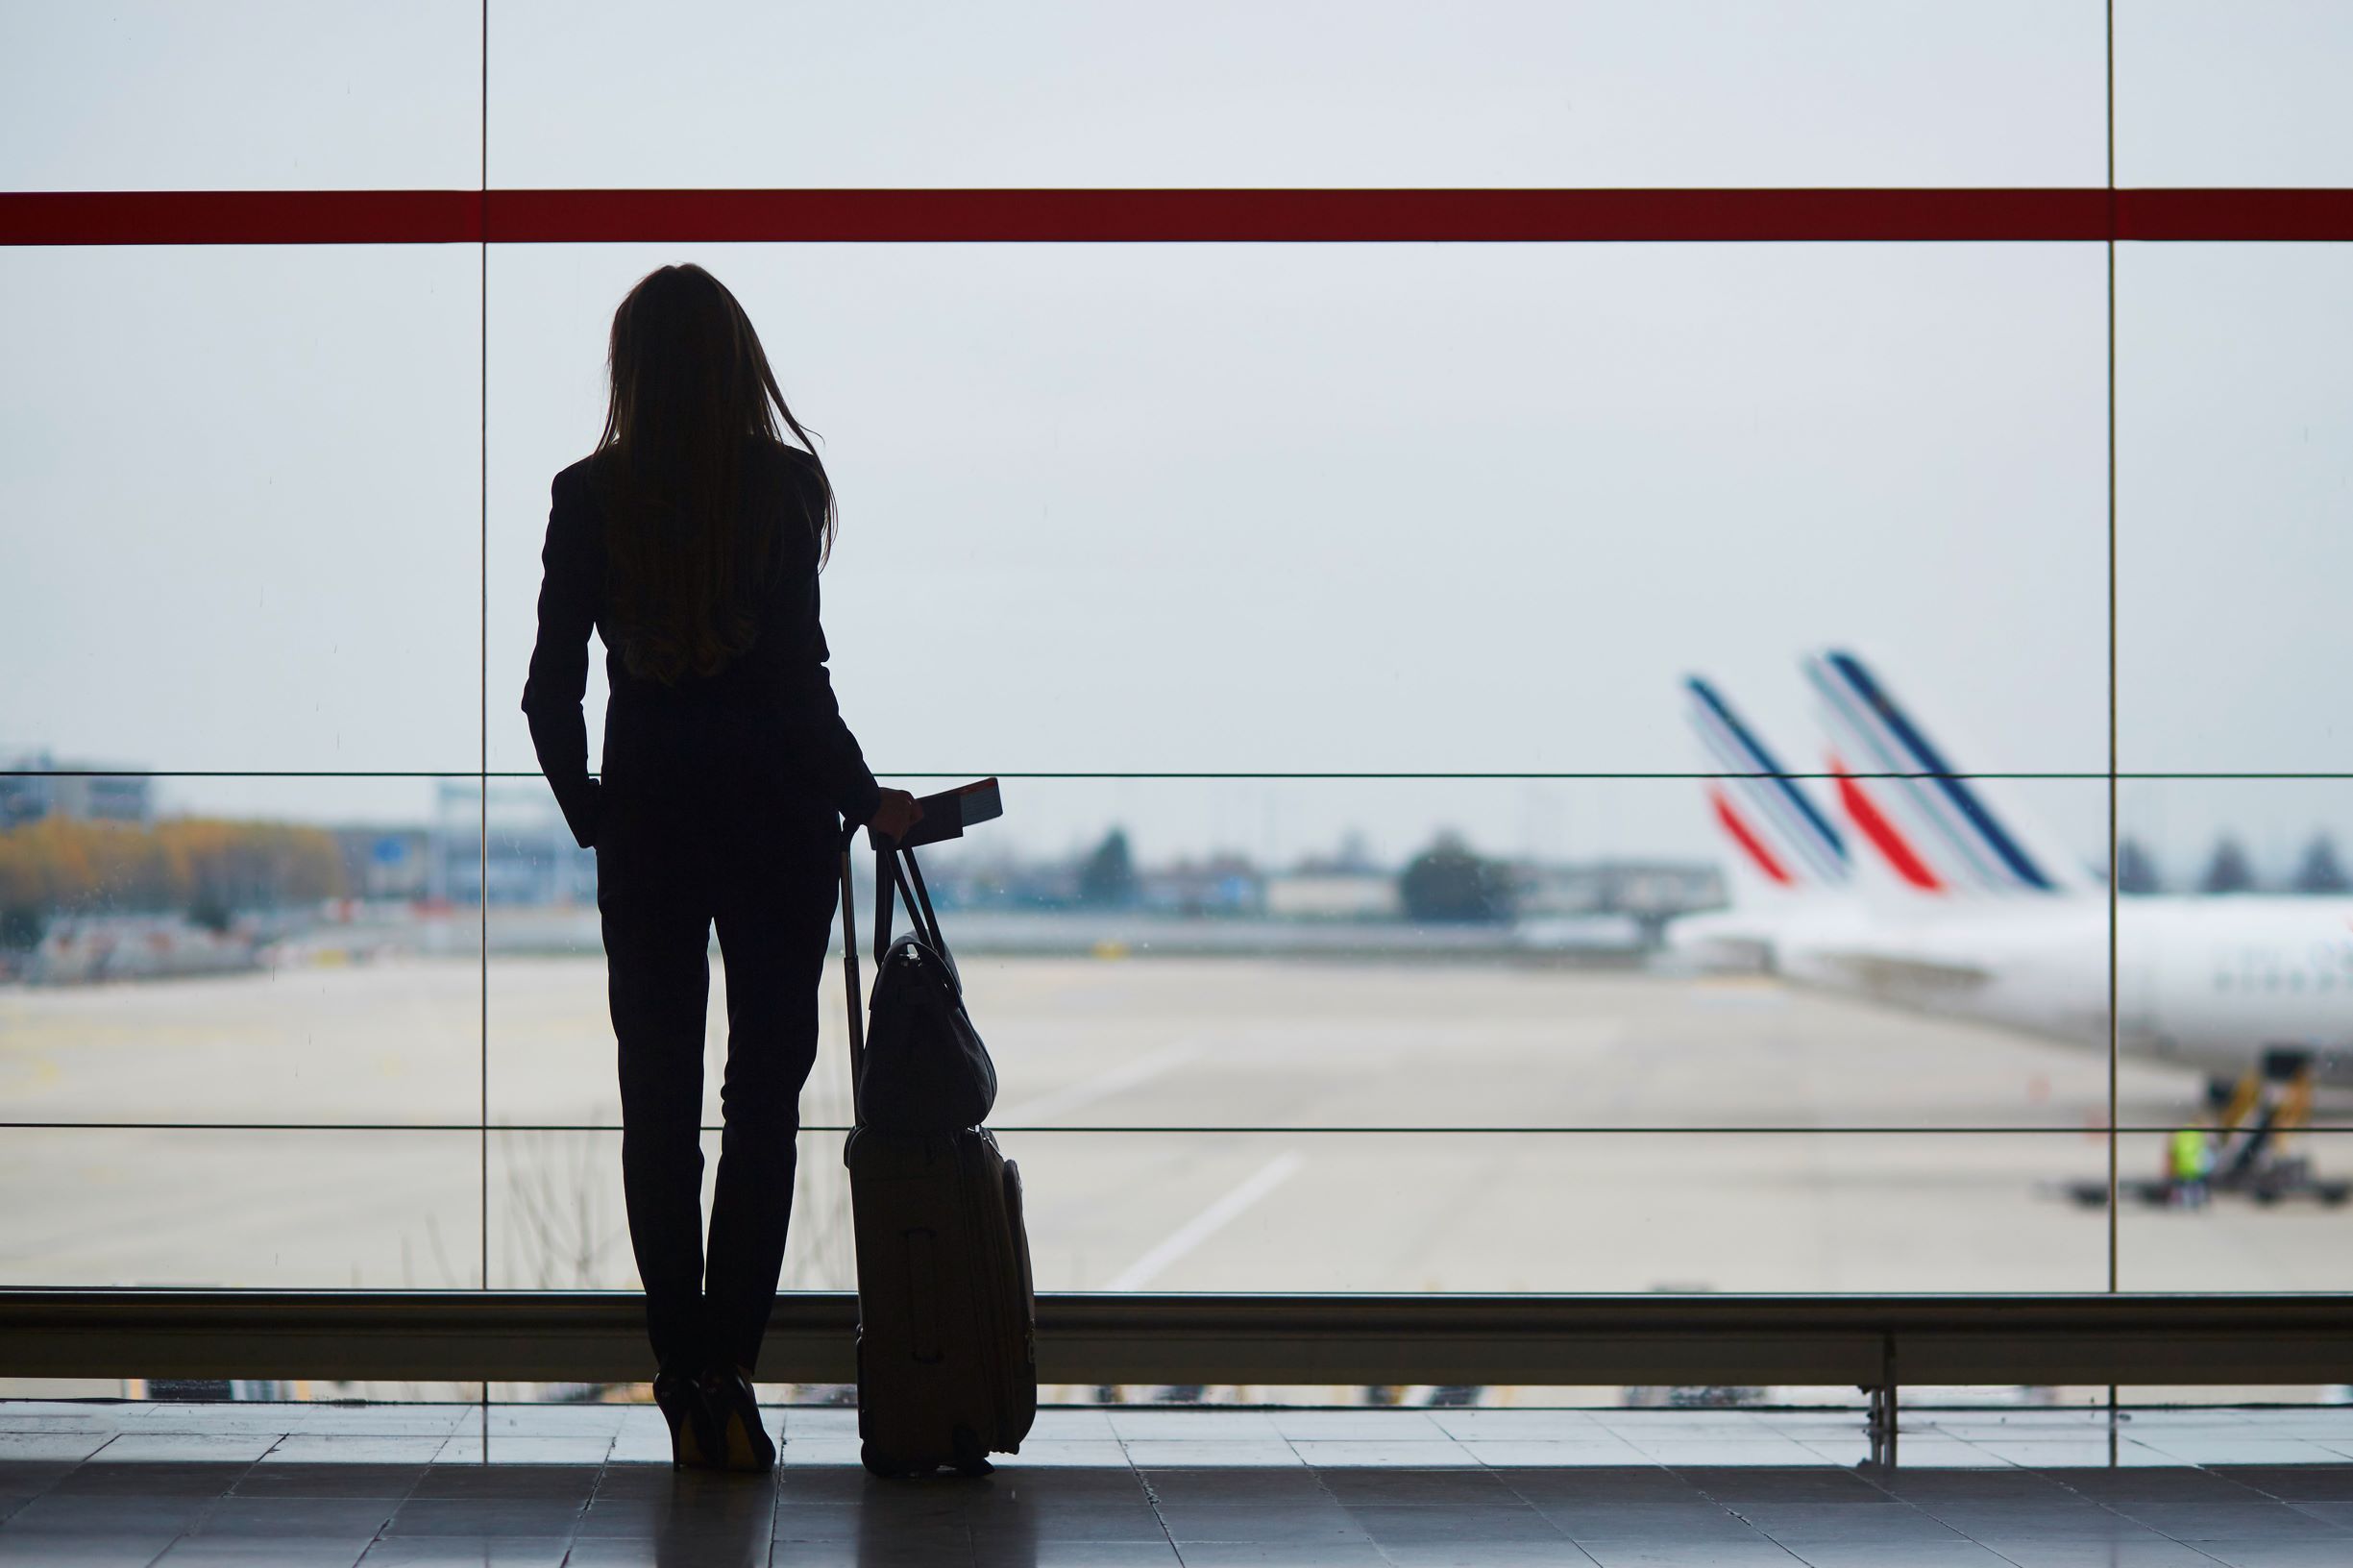 Woman holding suitcase in an airport looking out the window at airplanes on tarmac.